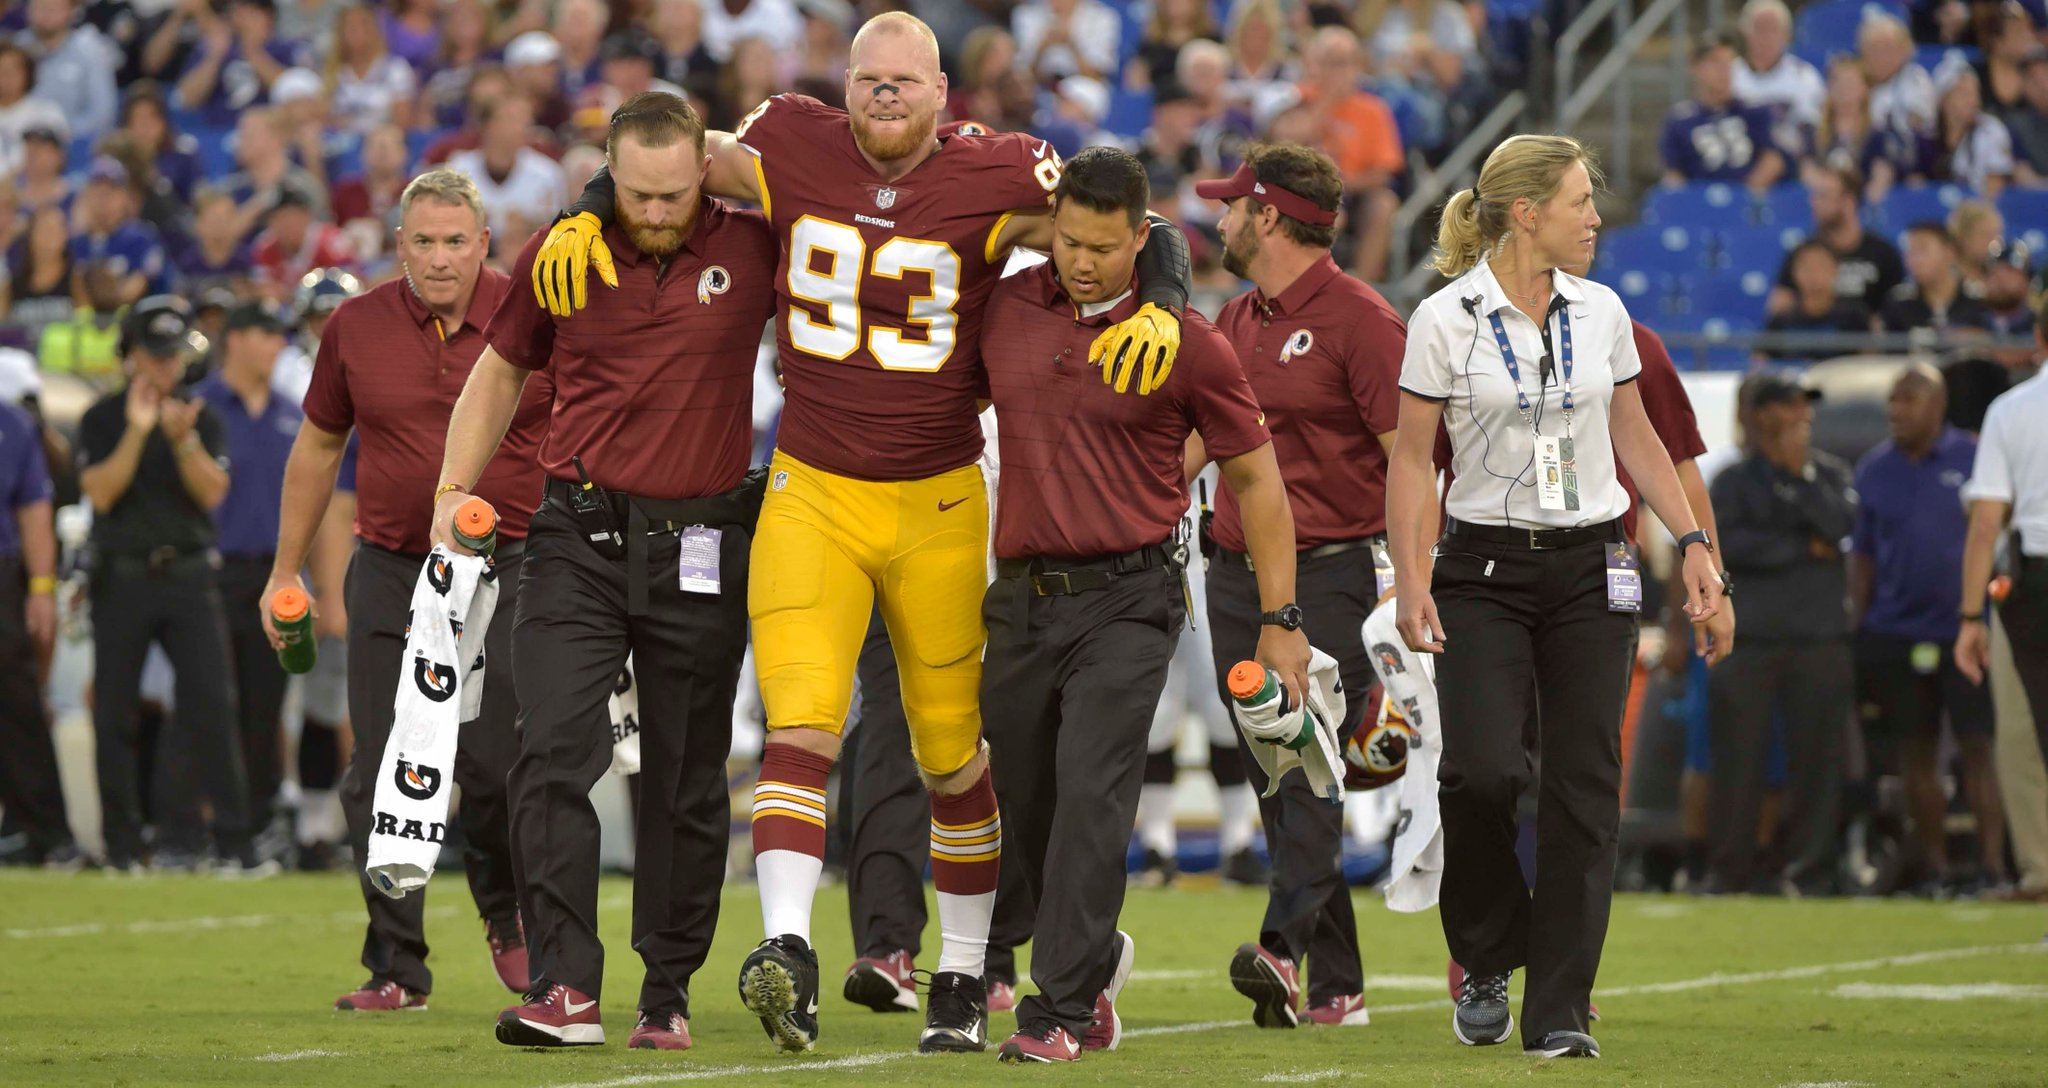 Redskins LB Trent Murphy Will Miss the Entire 2017 Season With Torn ACL/MCL